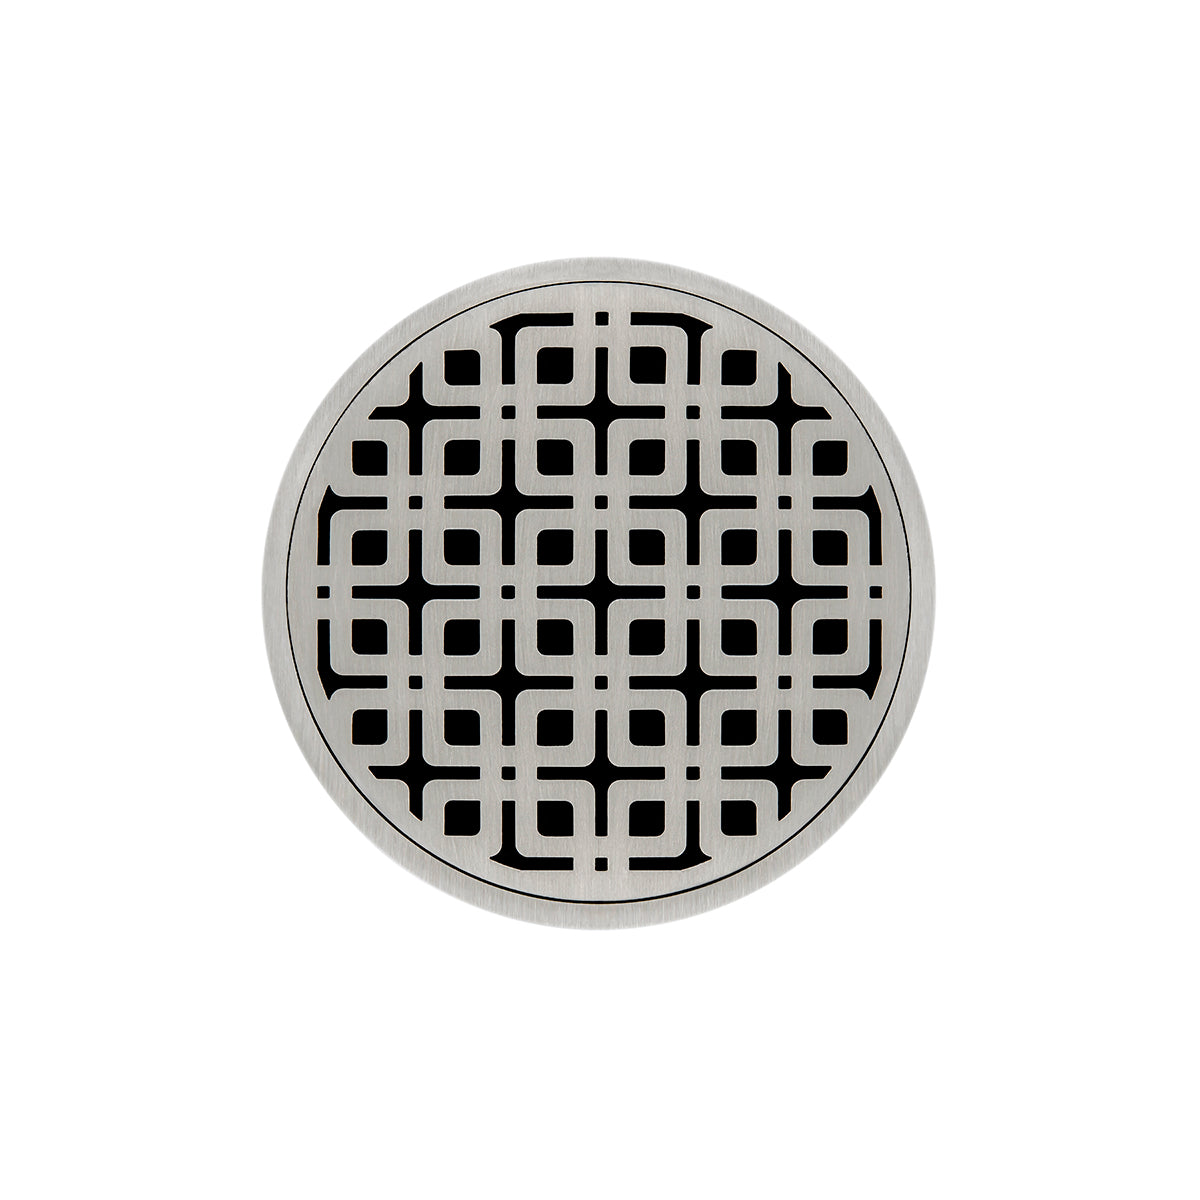 Infinity Drain 5" Round RKD 5 Premium Center Drain Kit with Link Pattern Decorative Plate with Cast Iron Drain Body for Hot Mop, 2" Outlet